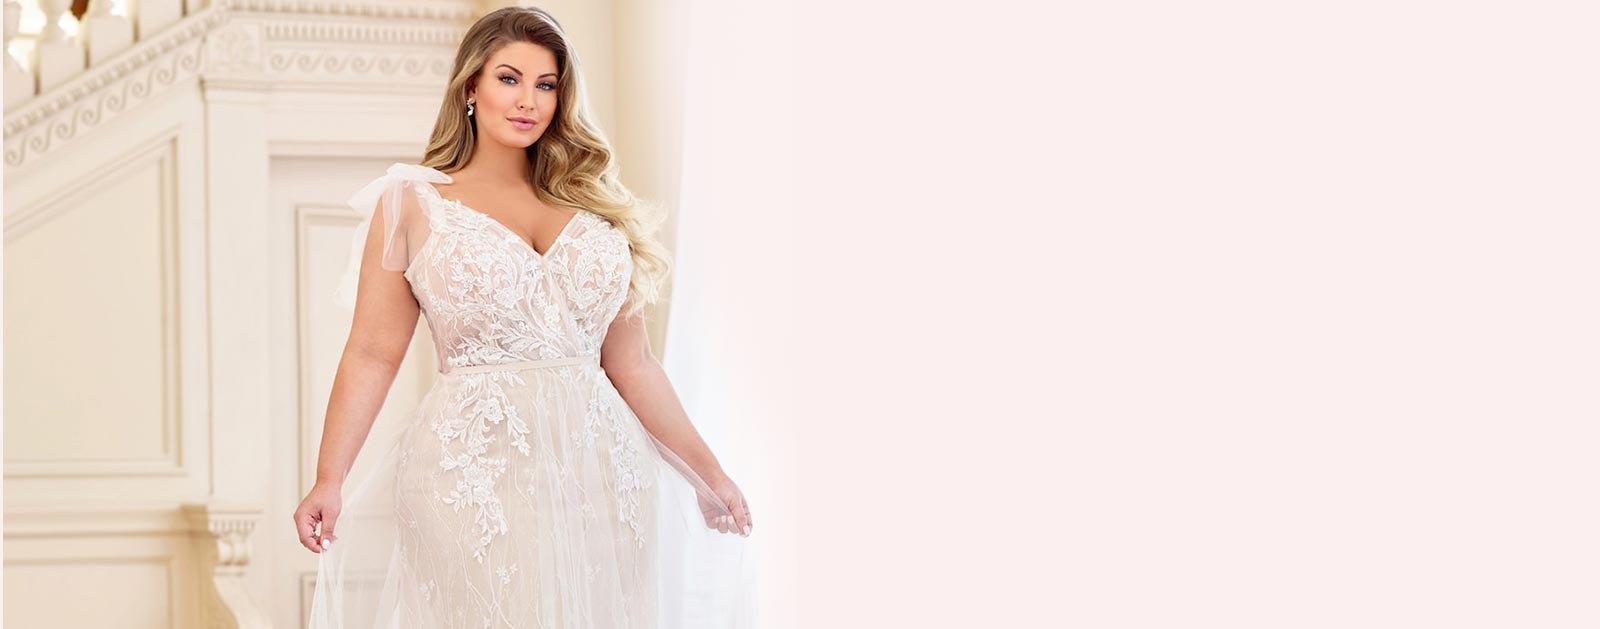 Plus Size Bridal Gown Available